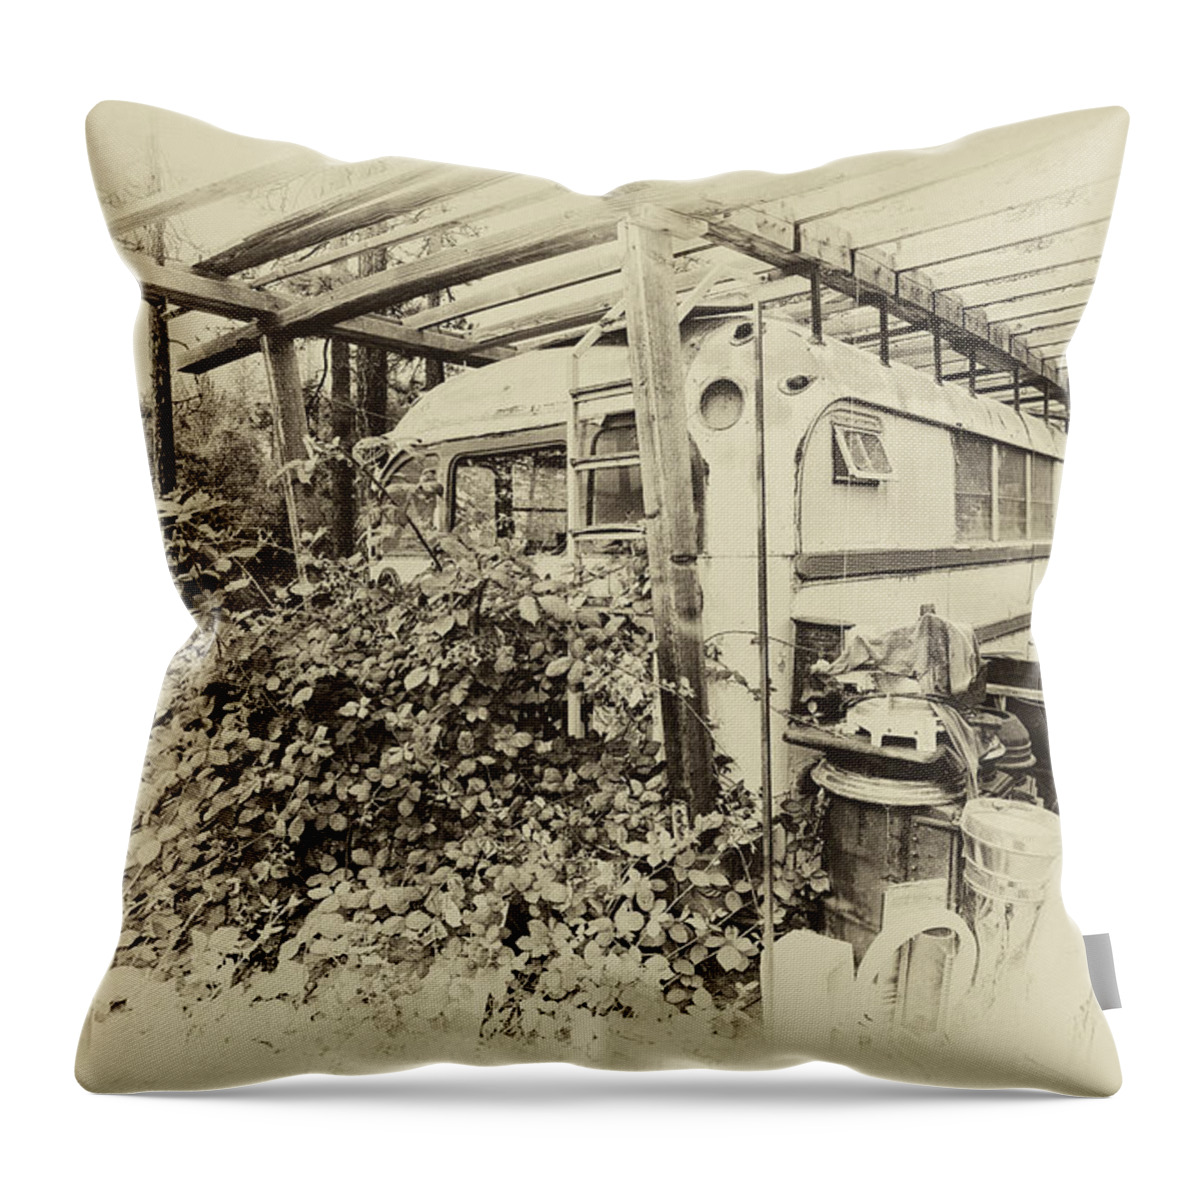 Bus Throw Pillow featuring the photograph The Old Bus by Tom Kelly